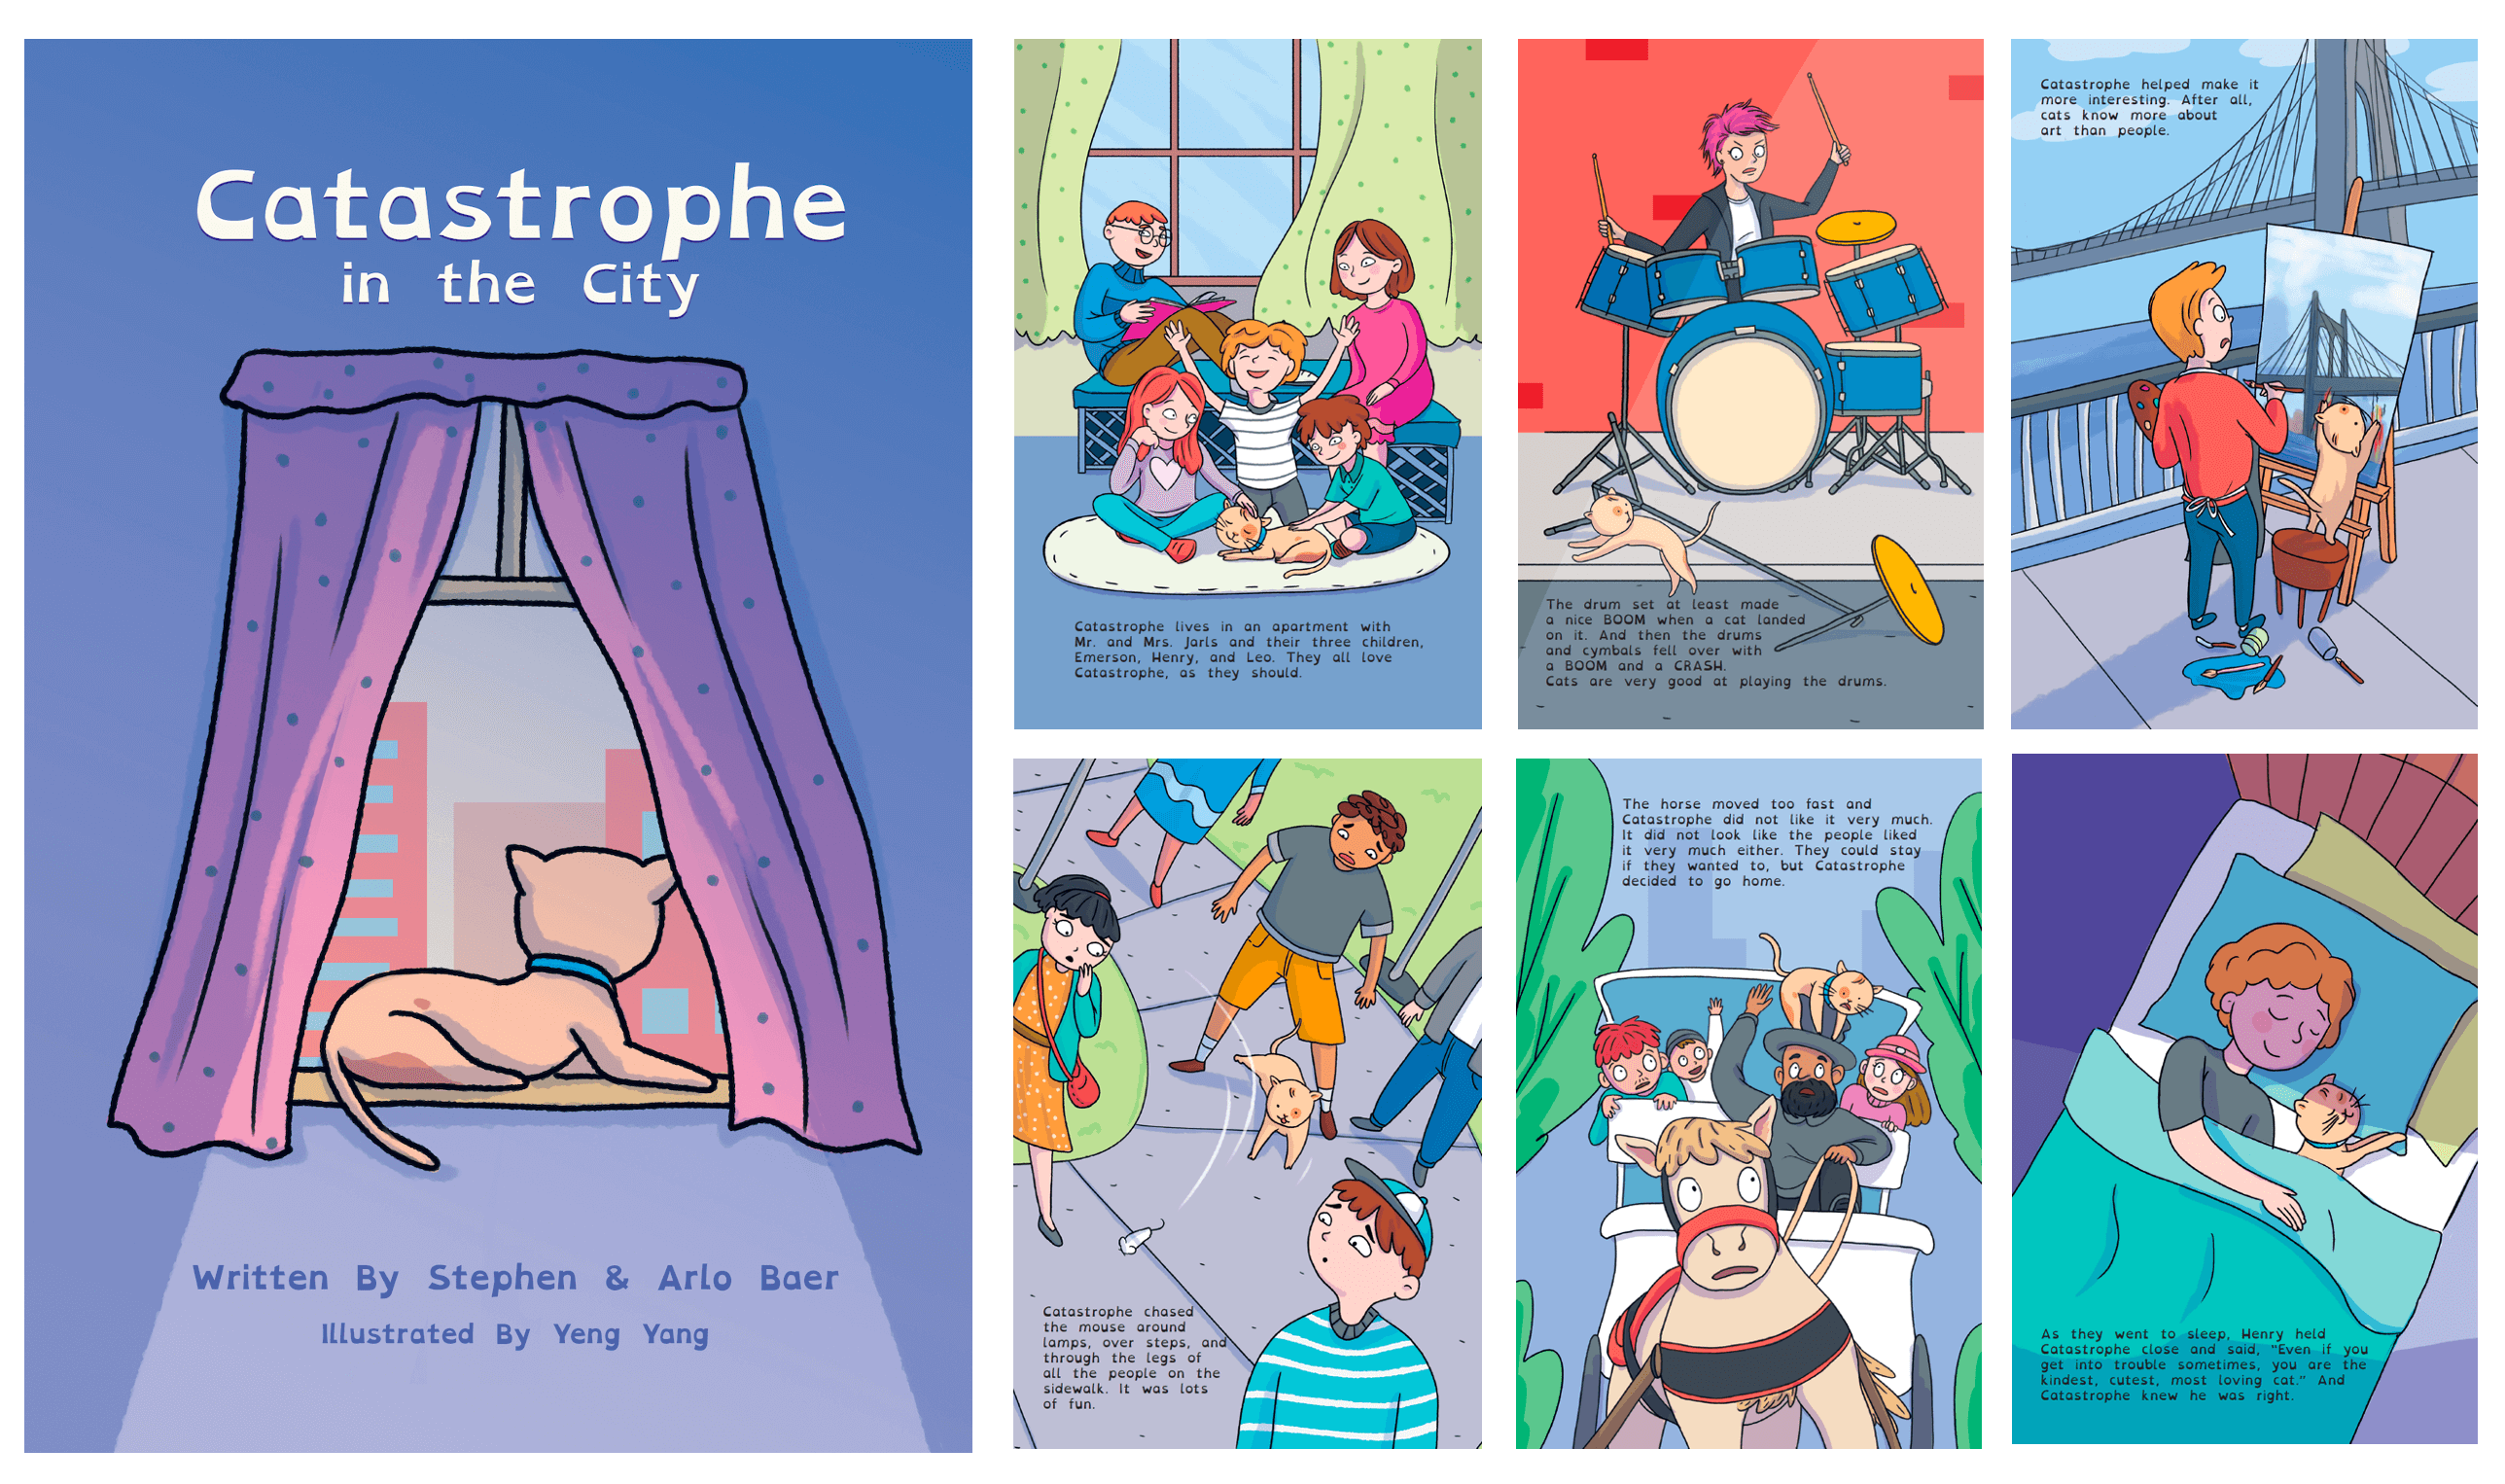 Catastrophe in the City spread